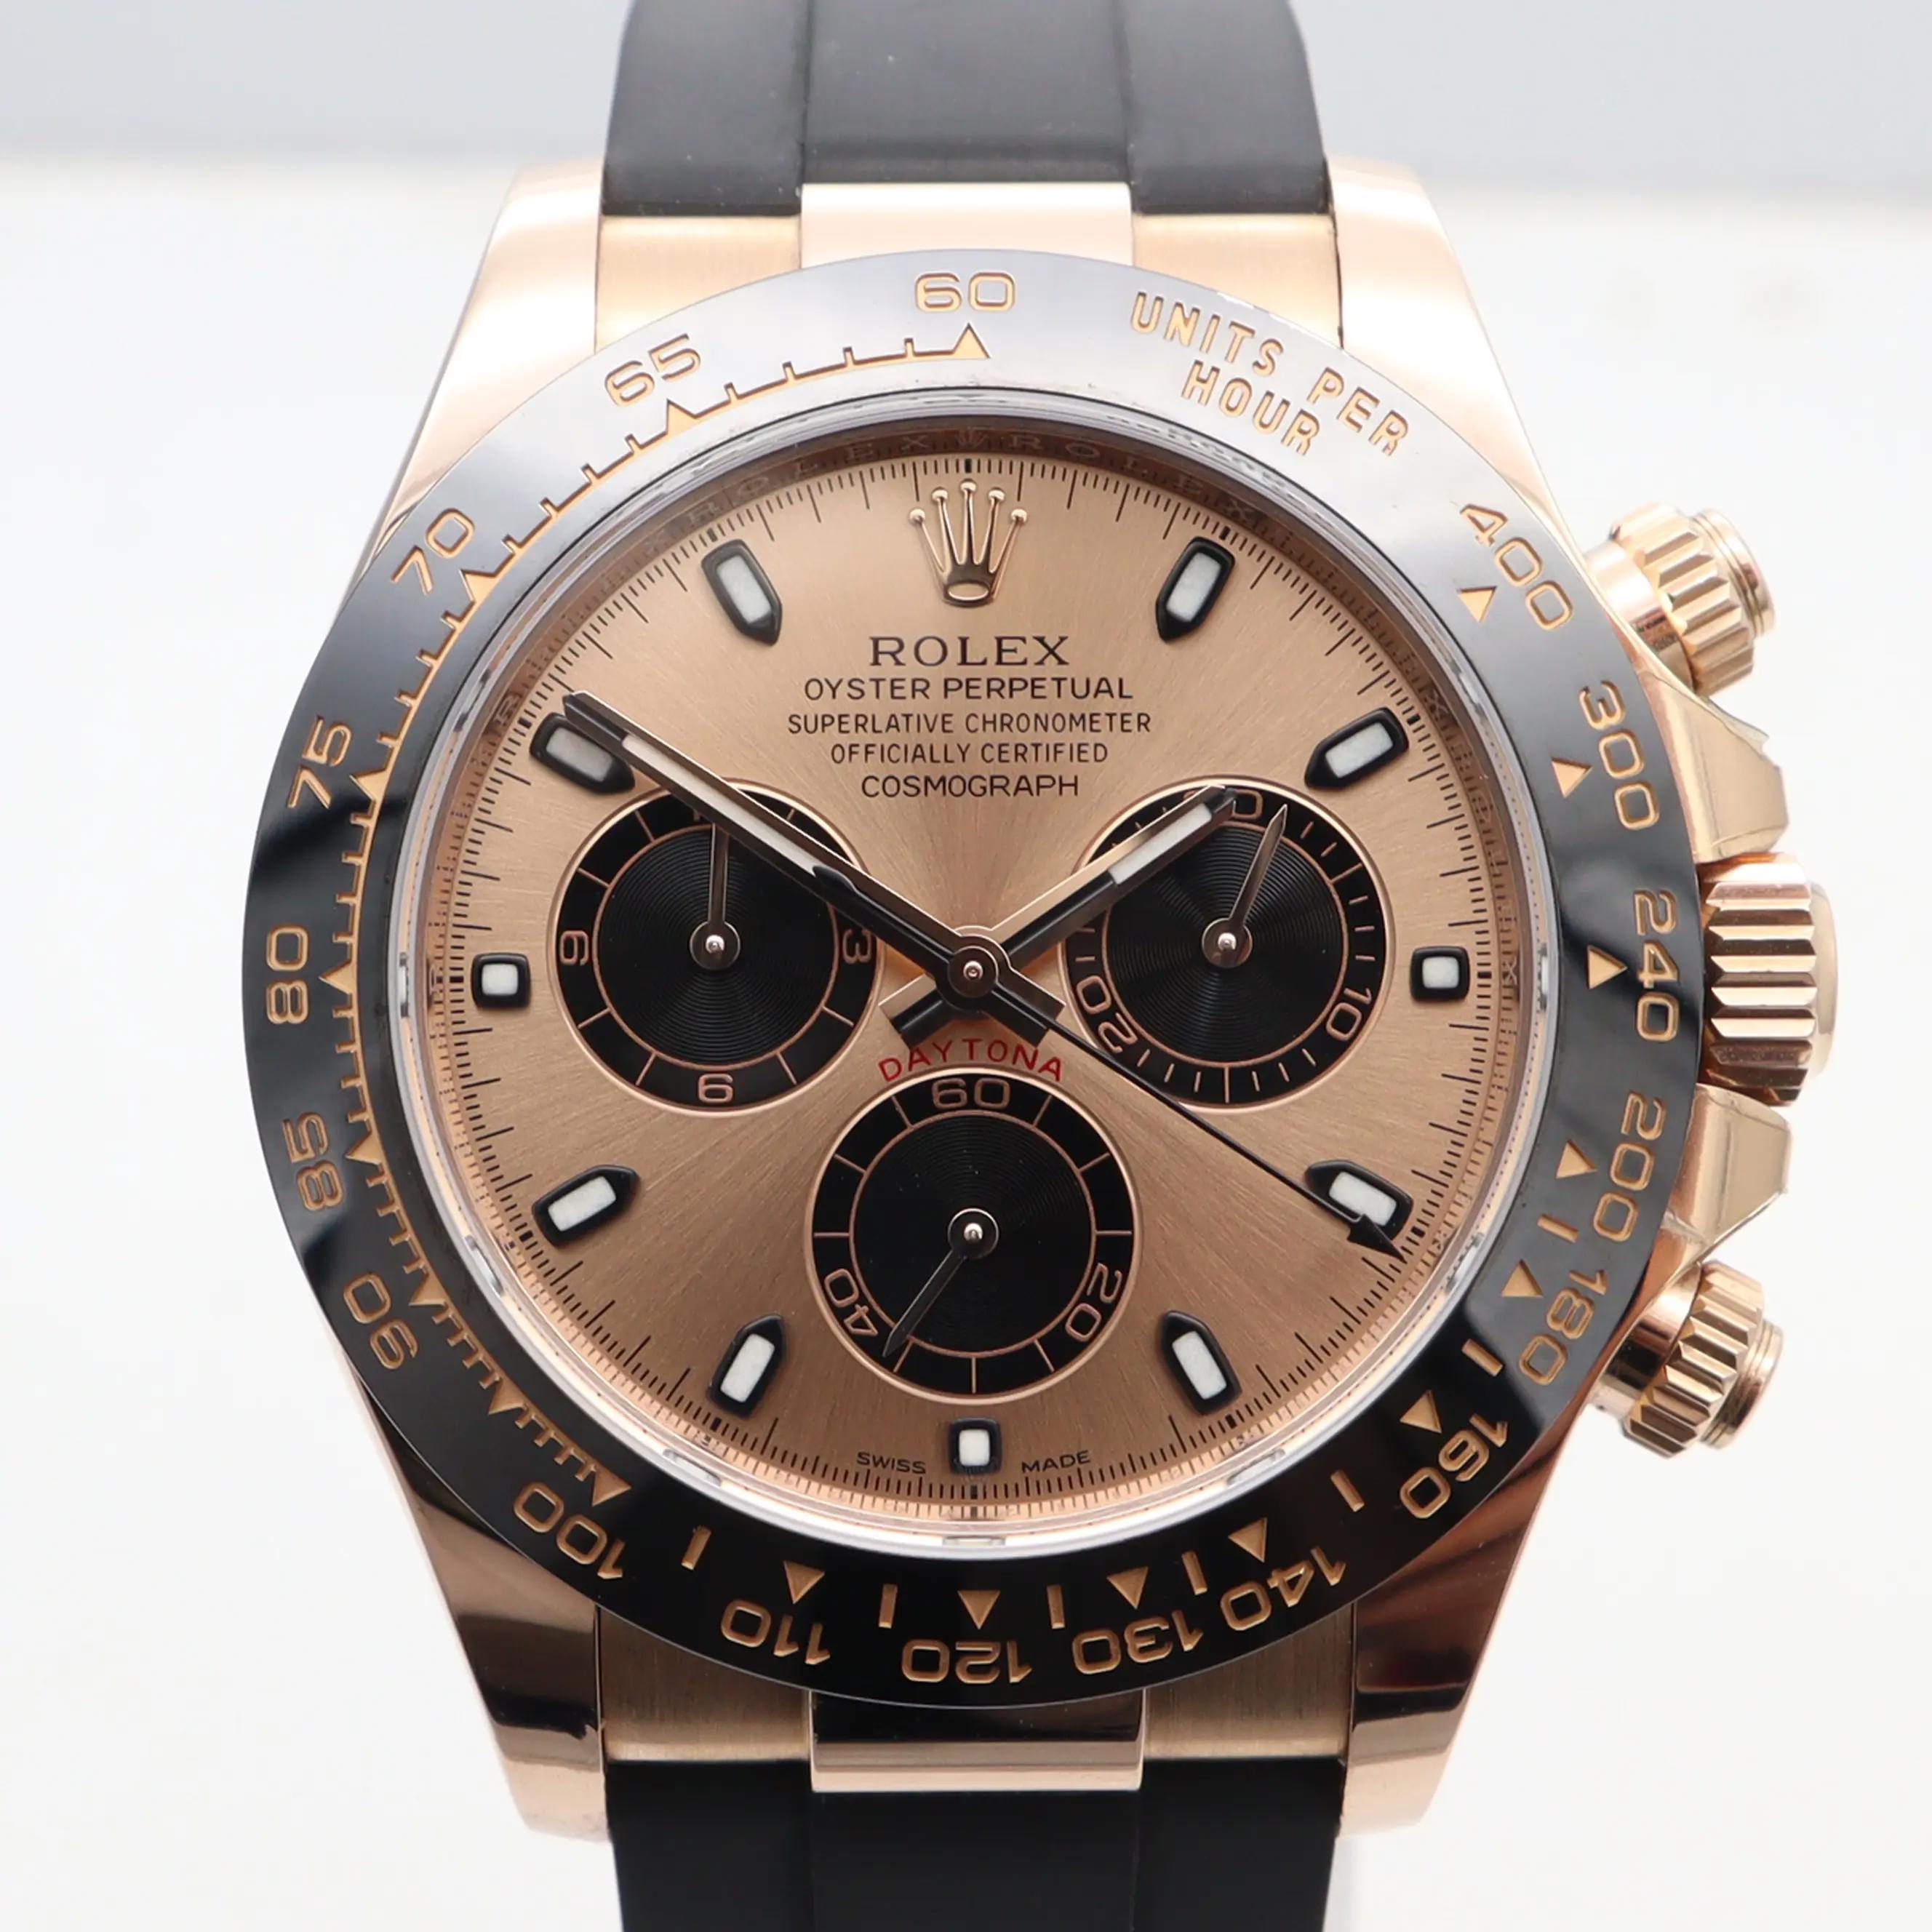 Rolex Cosmograph Daytona 18k Rose Gold Pink Dial Mens Watch 116515LN In Excellent Condition For Sale In New York, NY